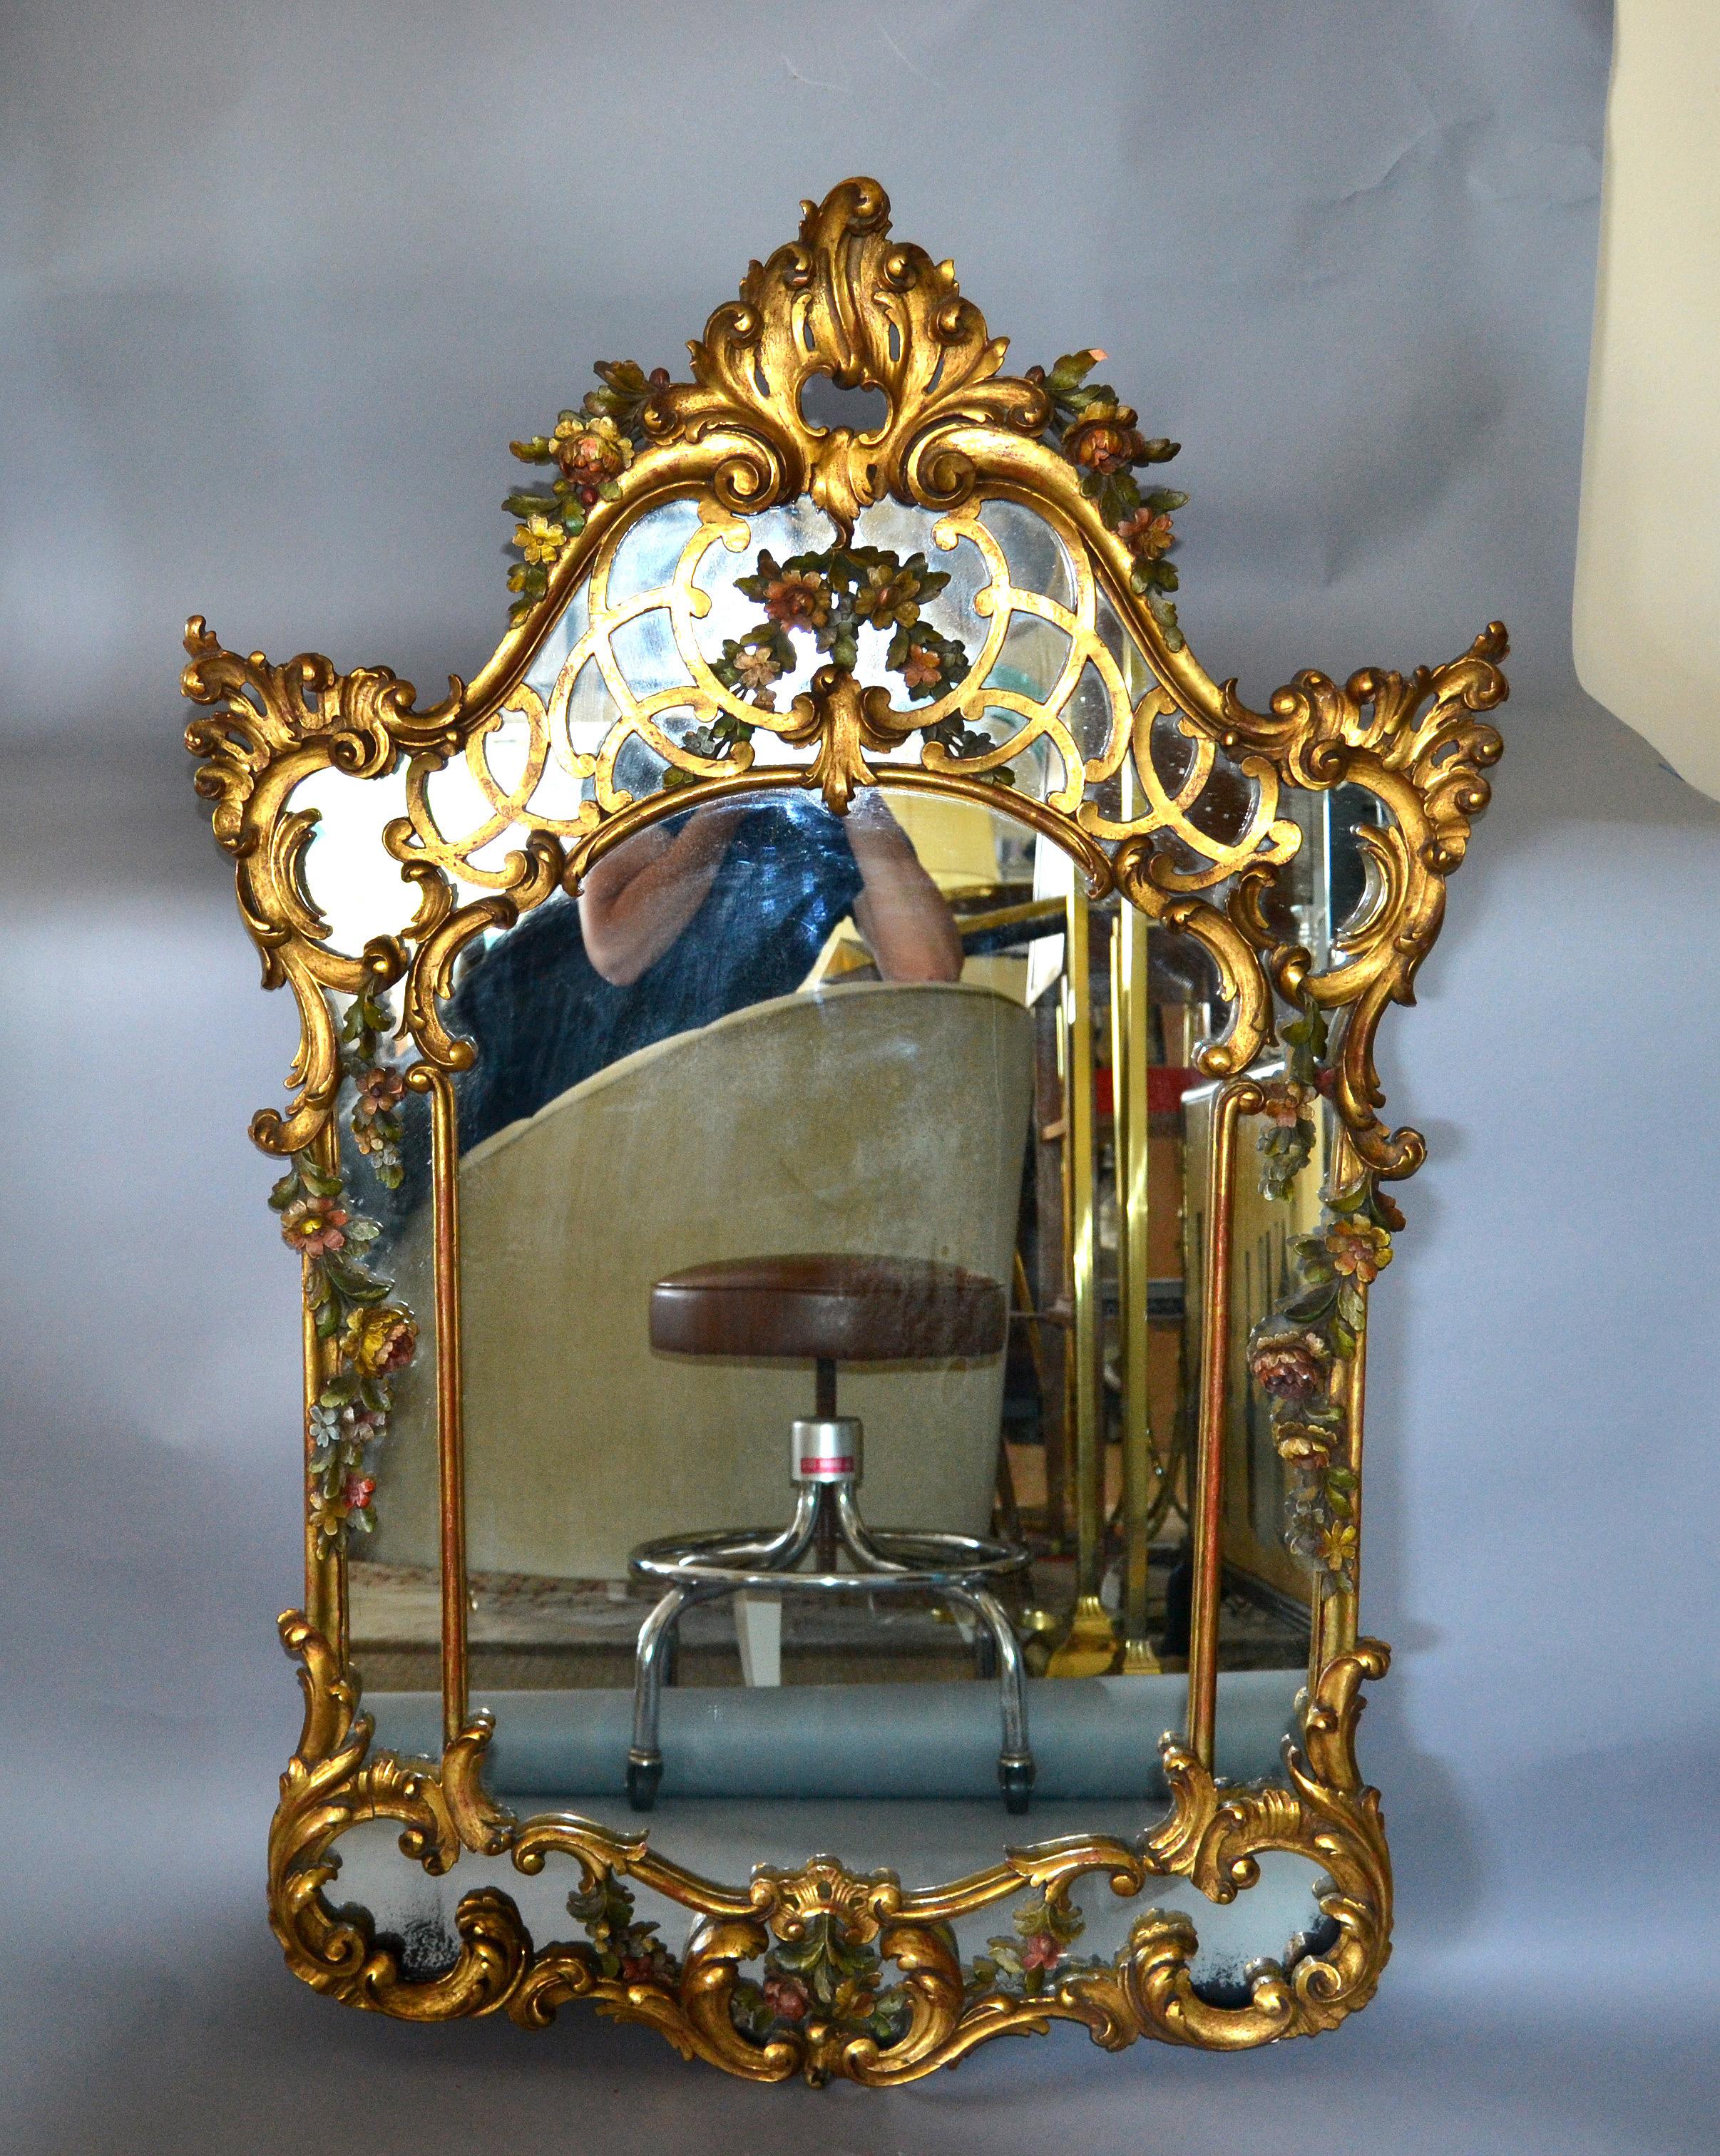 19th century French Rococo style gilt wall mirror hand carved wood with flowers and wreaths.
This mirror is in original vintage condition.
 